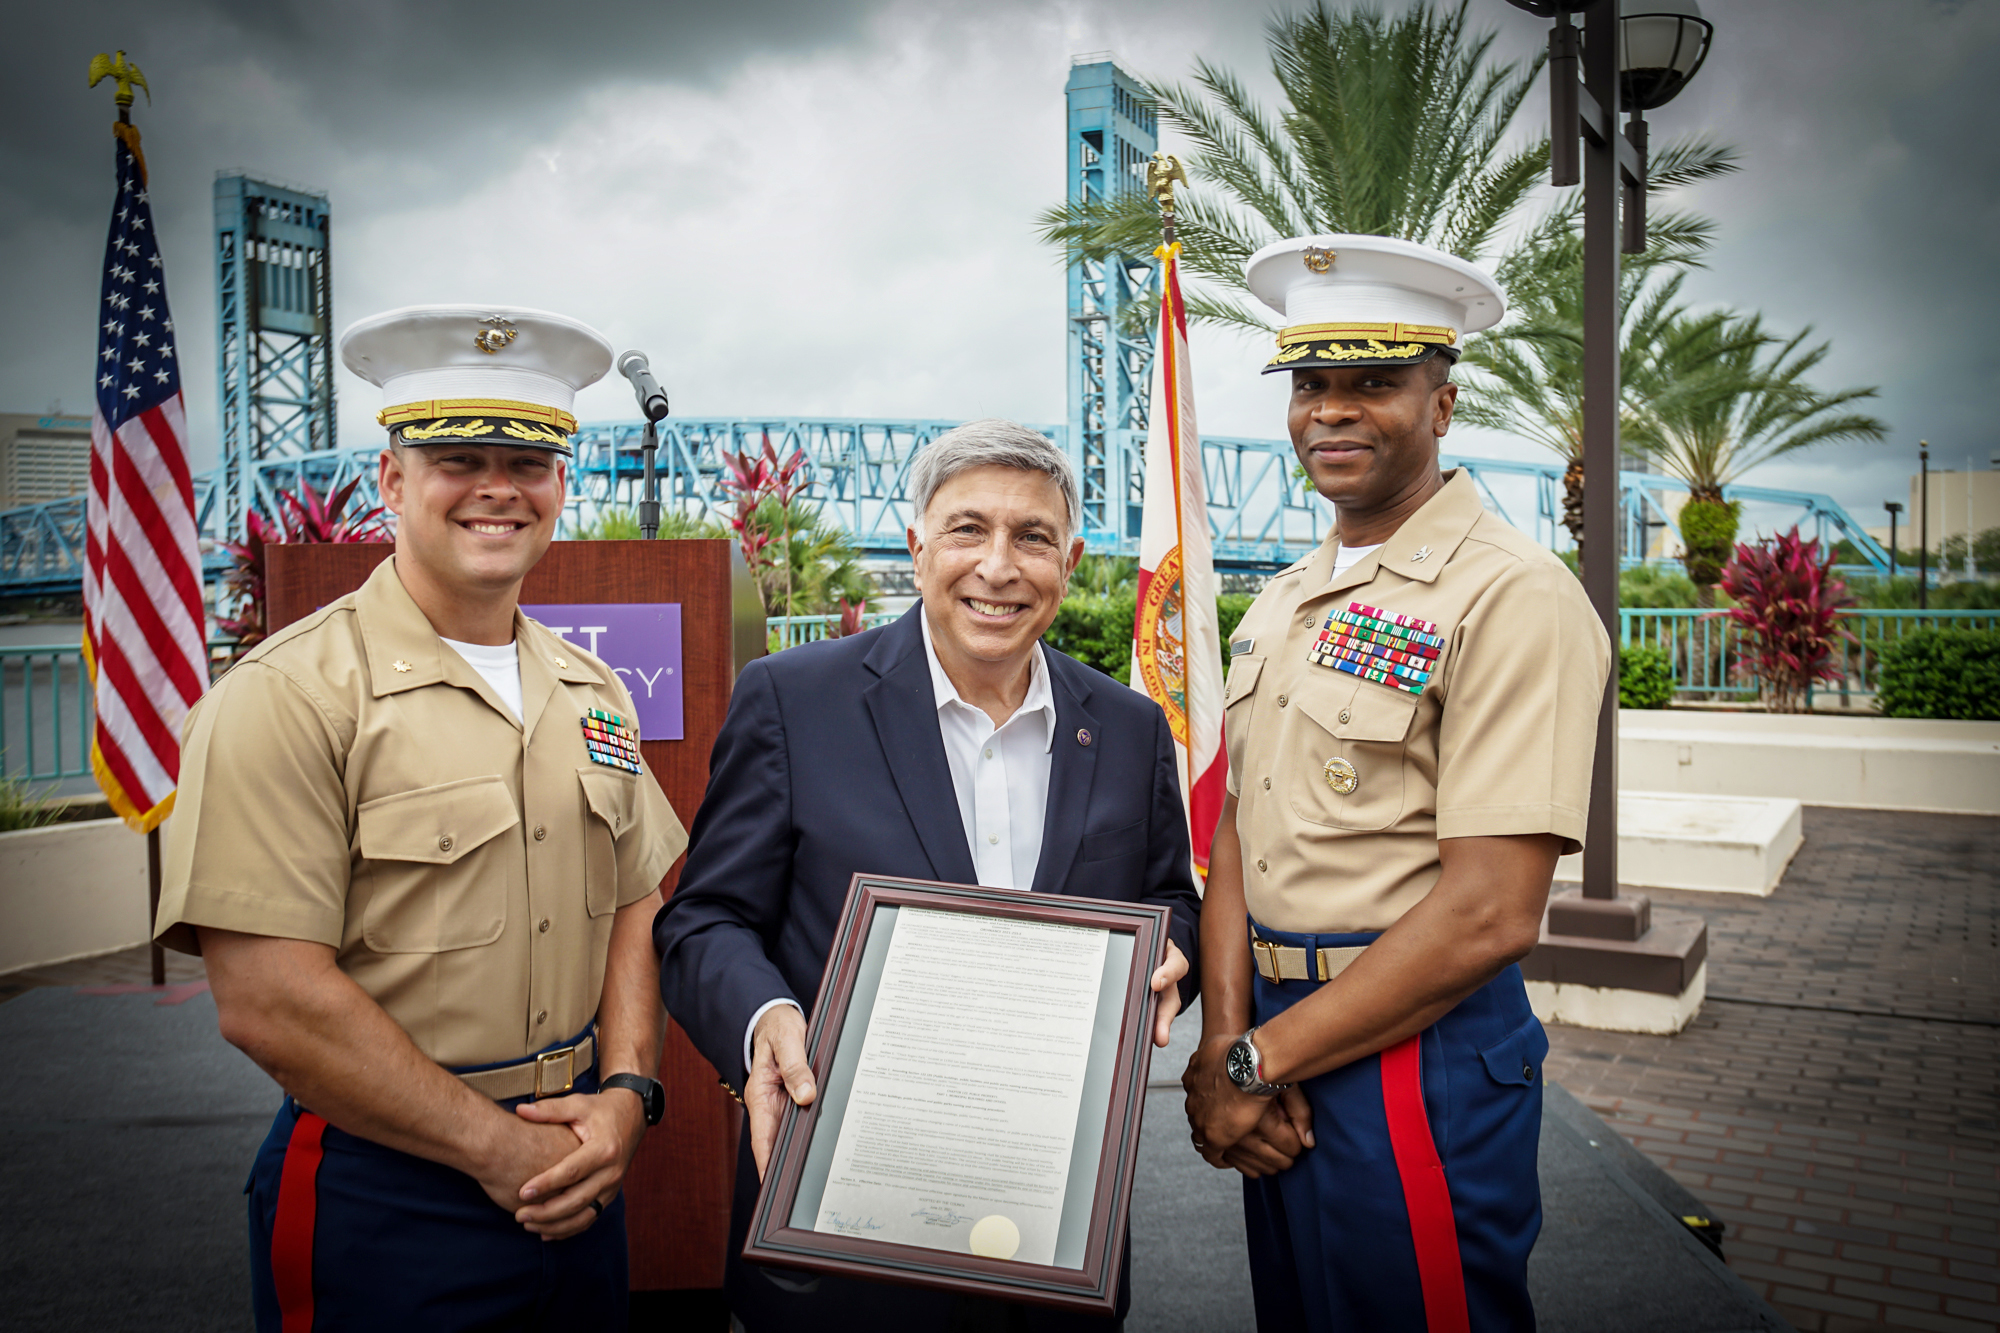 Tommy Hazouri presents a Council resolution thanking the U.S. Marine Corps on June 28. The Marines used the Hyatt Regency Jacksonville Riverfront to quarantine recruits because of the pandemic.